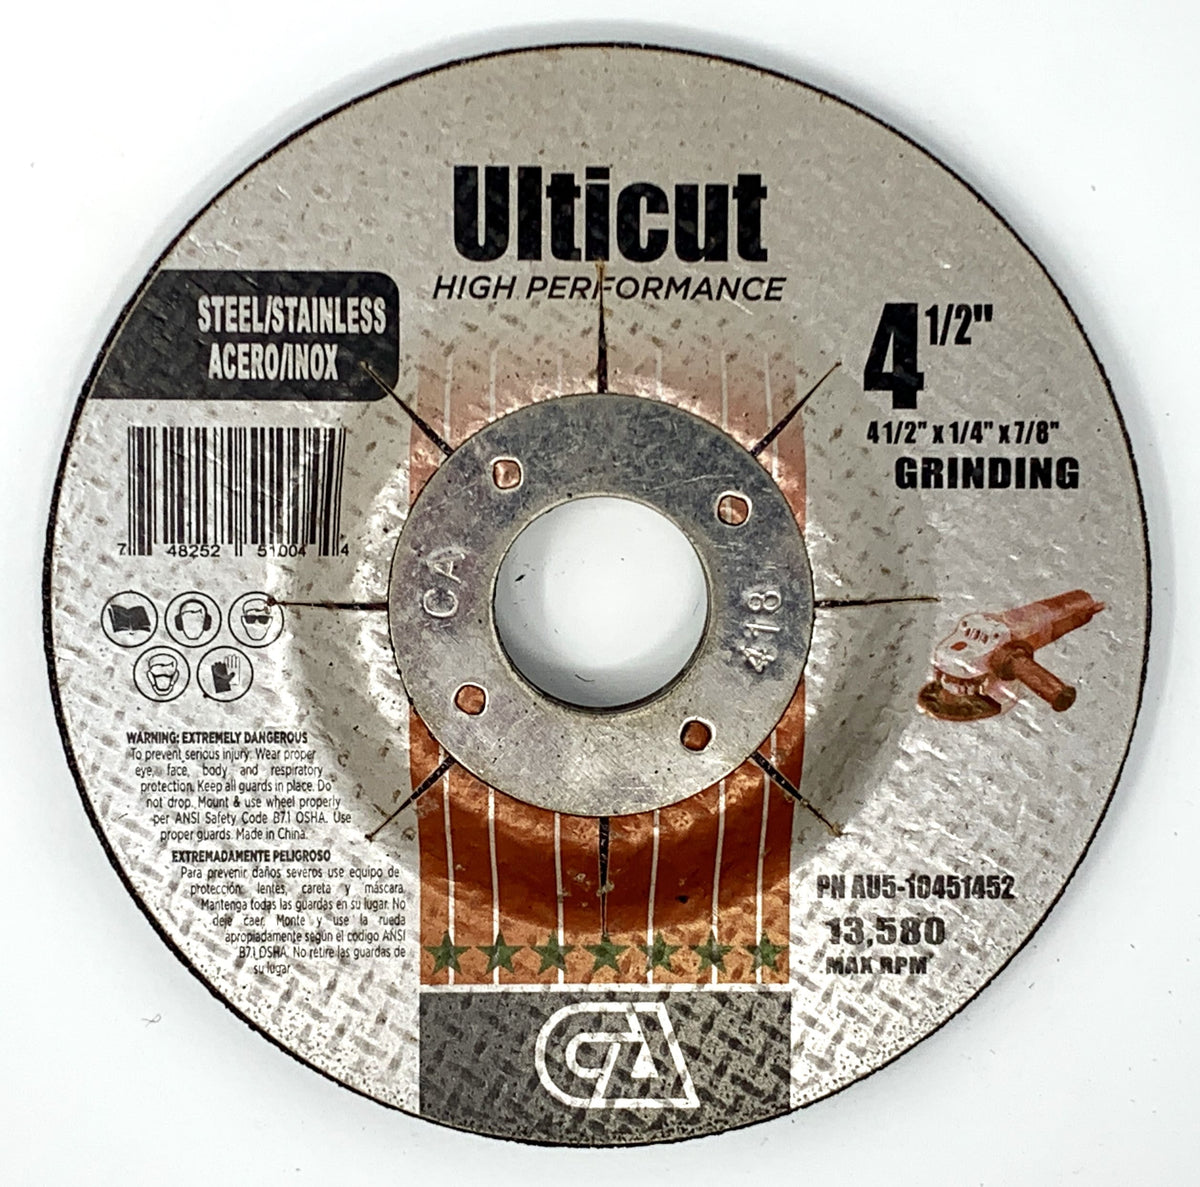 7" x 1/4" x 7/8" Type 27 Cutting & Grinding Wheels (Pack of 20)